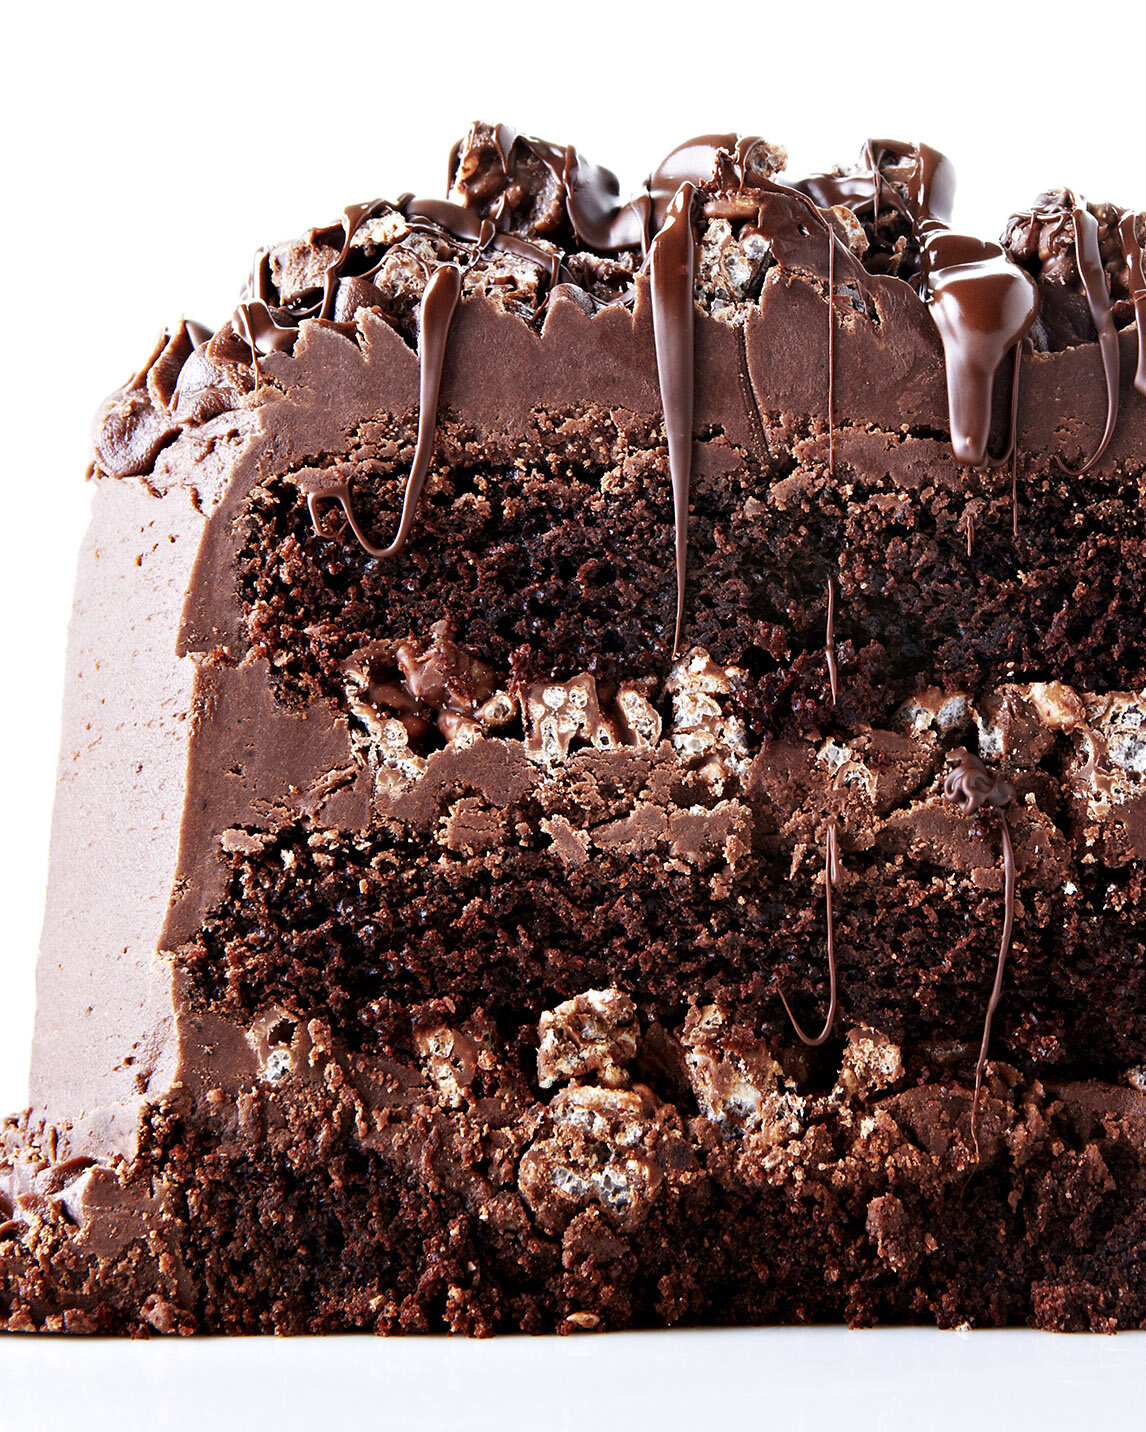 IV. Tips for Baking Decadent Chocolate Cakes at Home